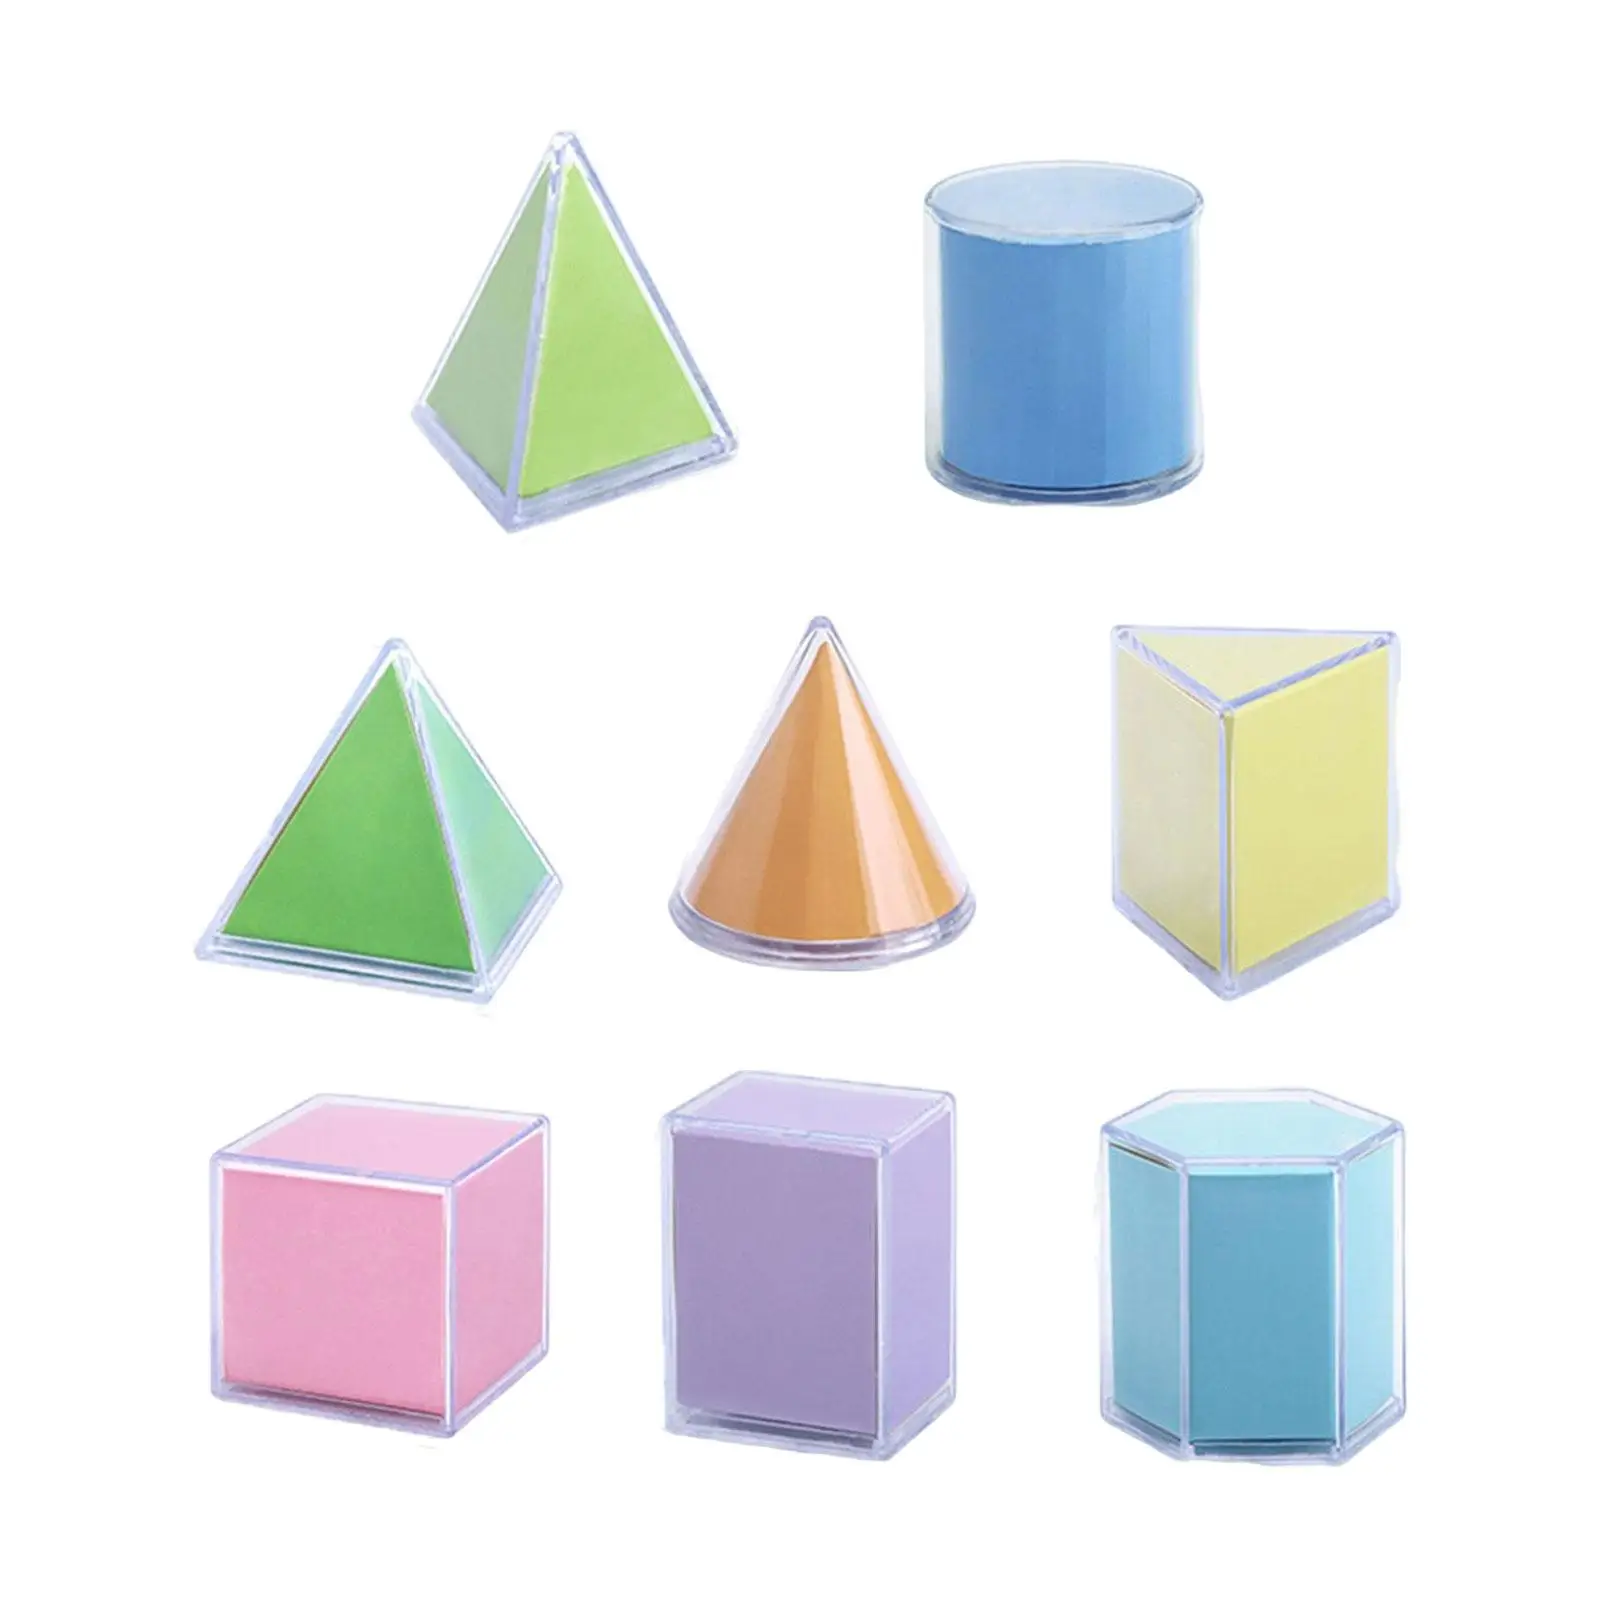 8x Transparent Geometric Shapes Blocks Montessori Toys Stacking Game Educational Toy Math Toys for Kids Babies Ages 2+ Toddler